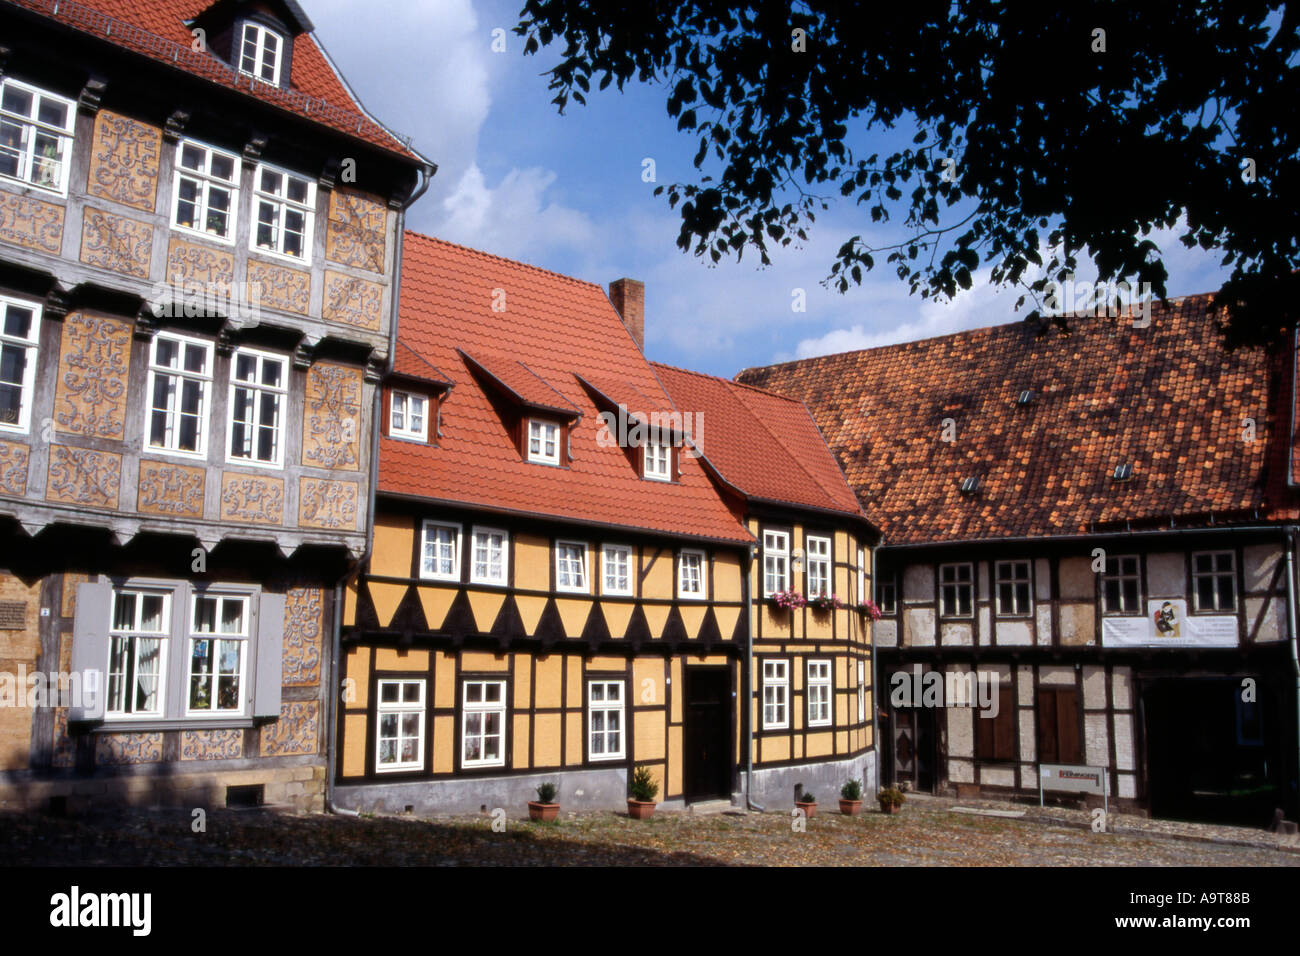 Medieval square with decorated half timberd houses in Quedlinburg Sachsen Anhalt Germany Stock Photo